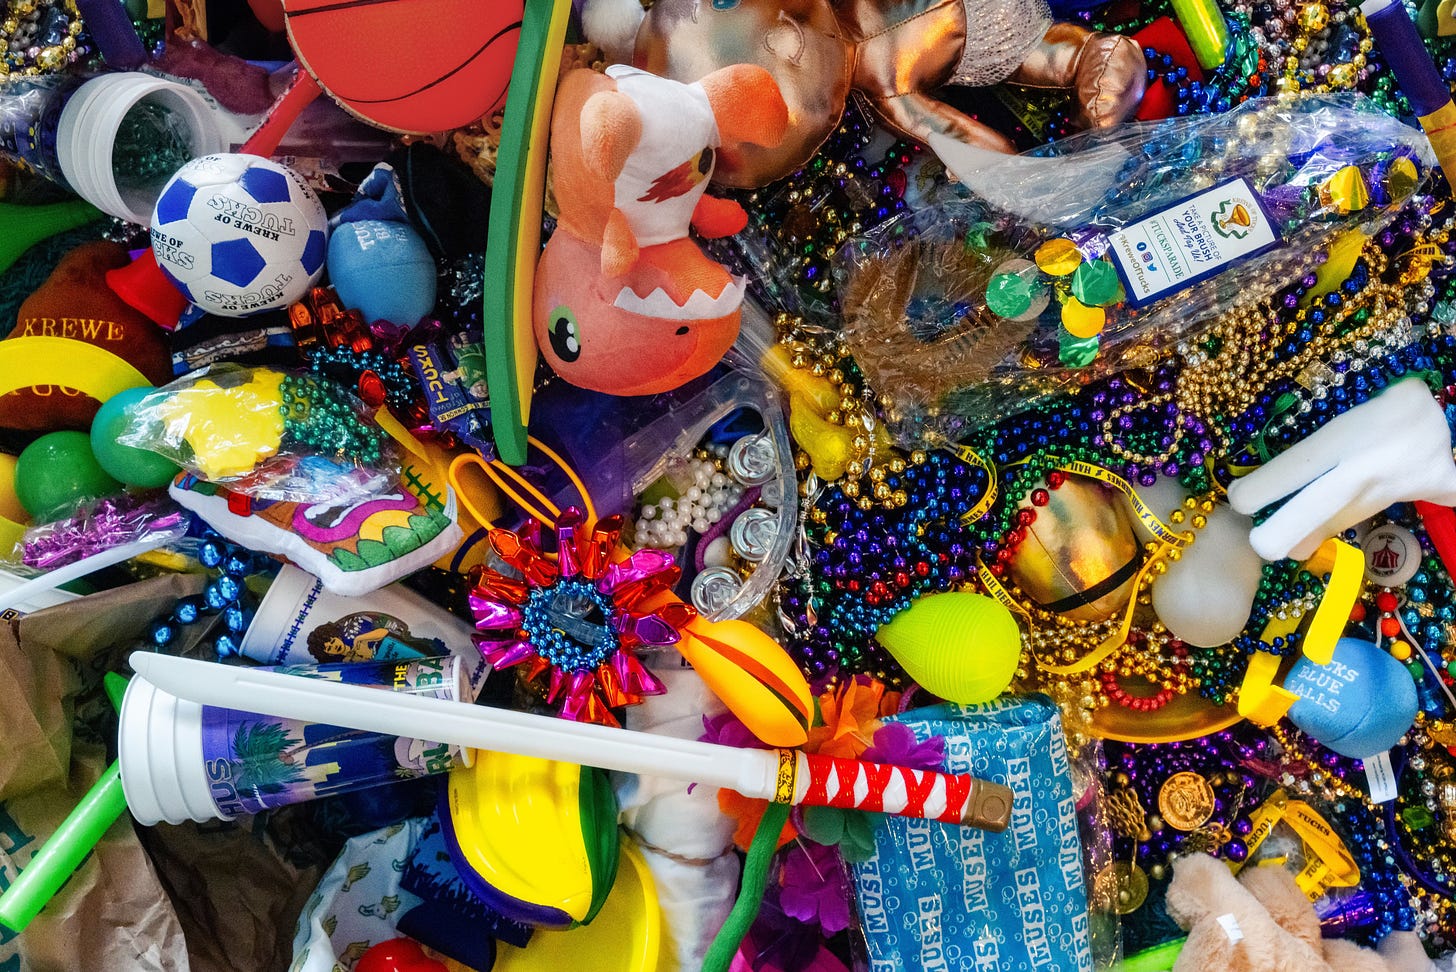 A colorful assortment of beads, stuffed toys, balls, cups, and plastic swords caught at Mardi Gras parades.